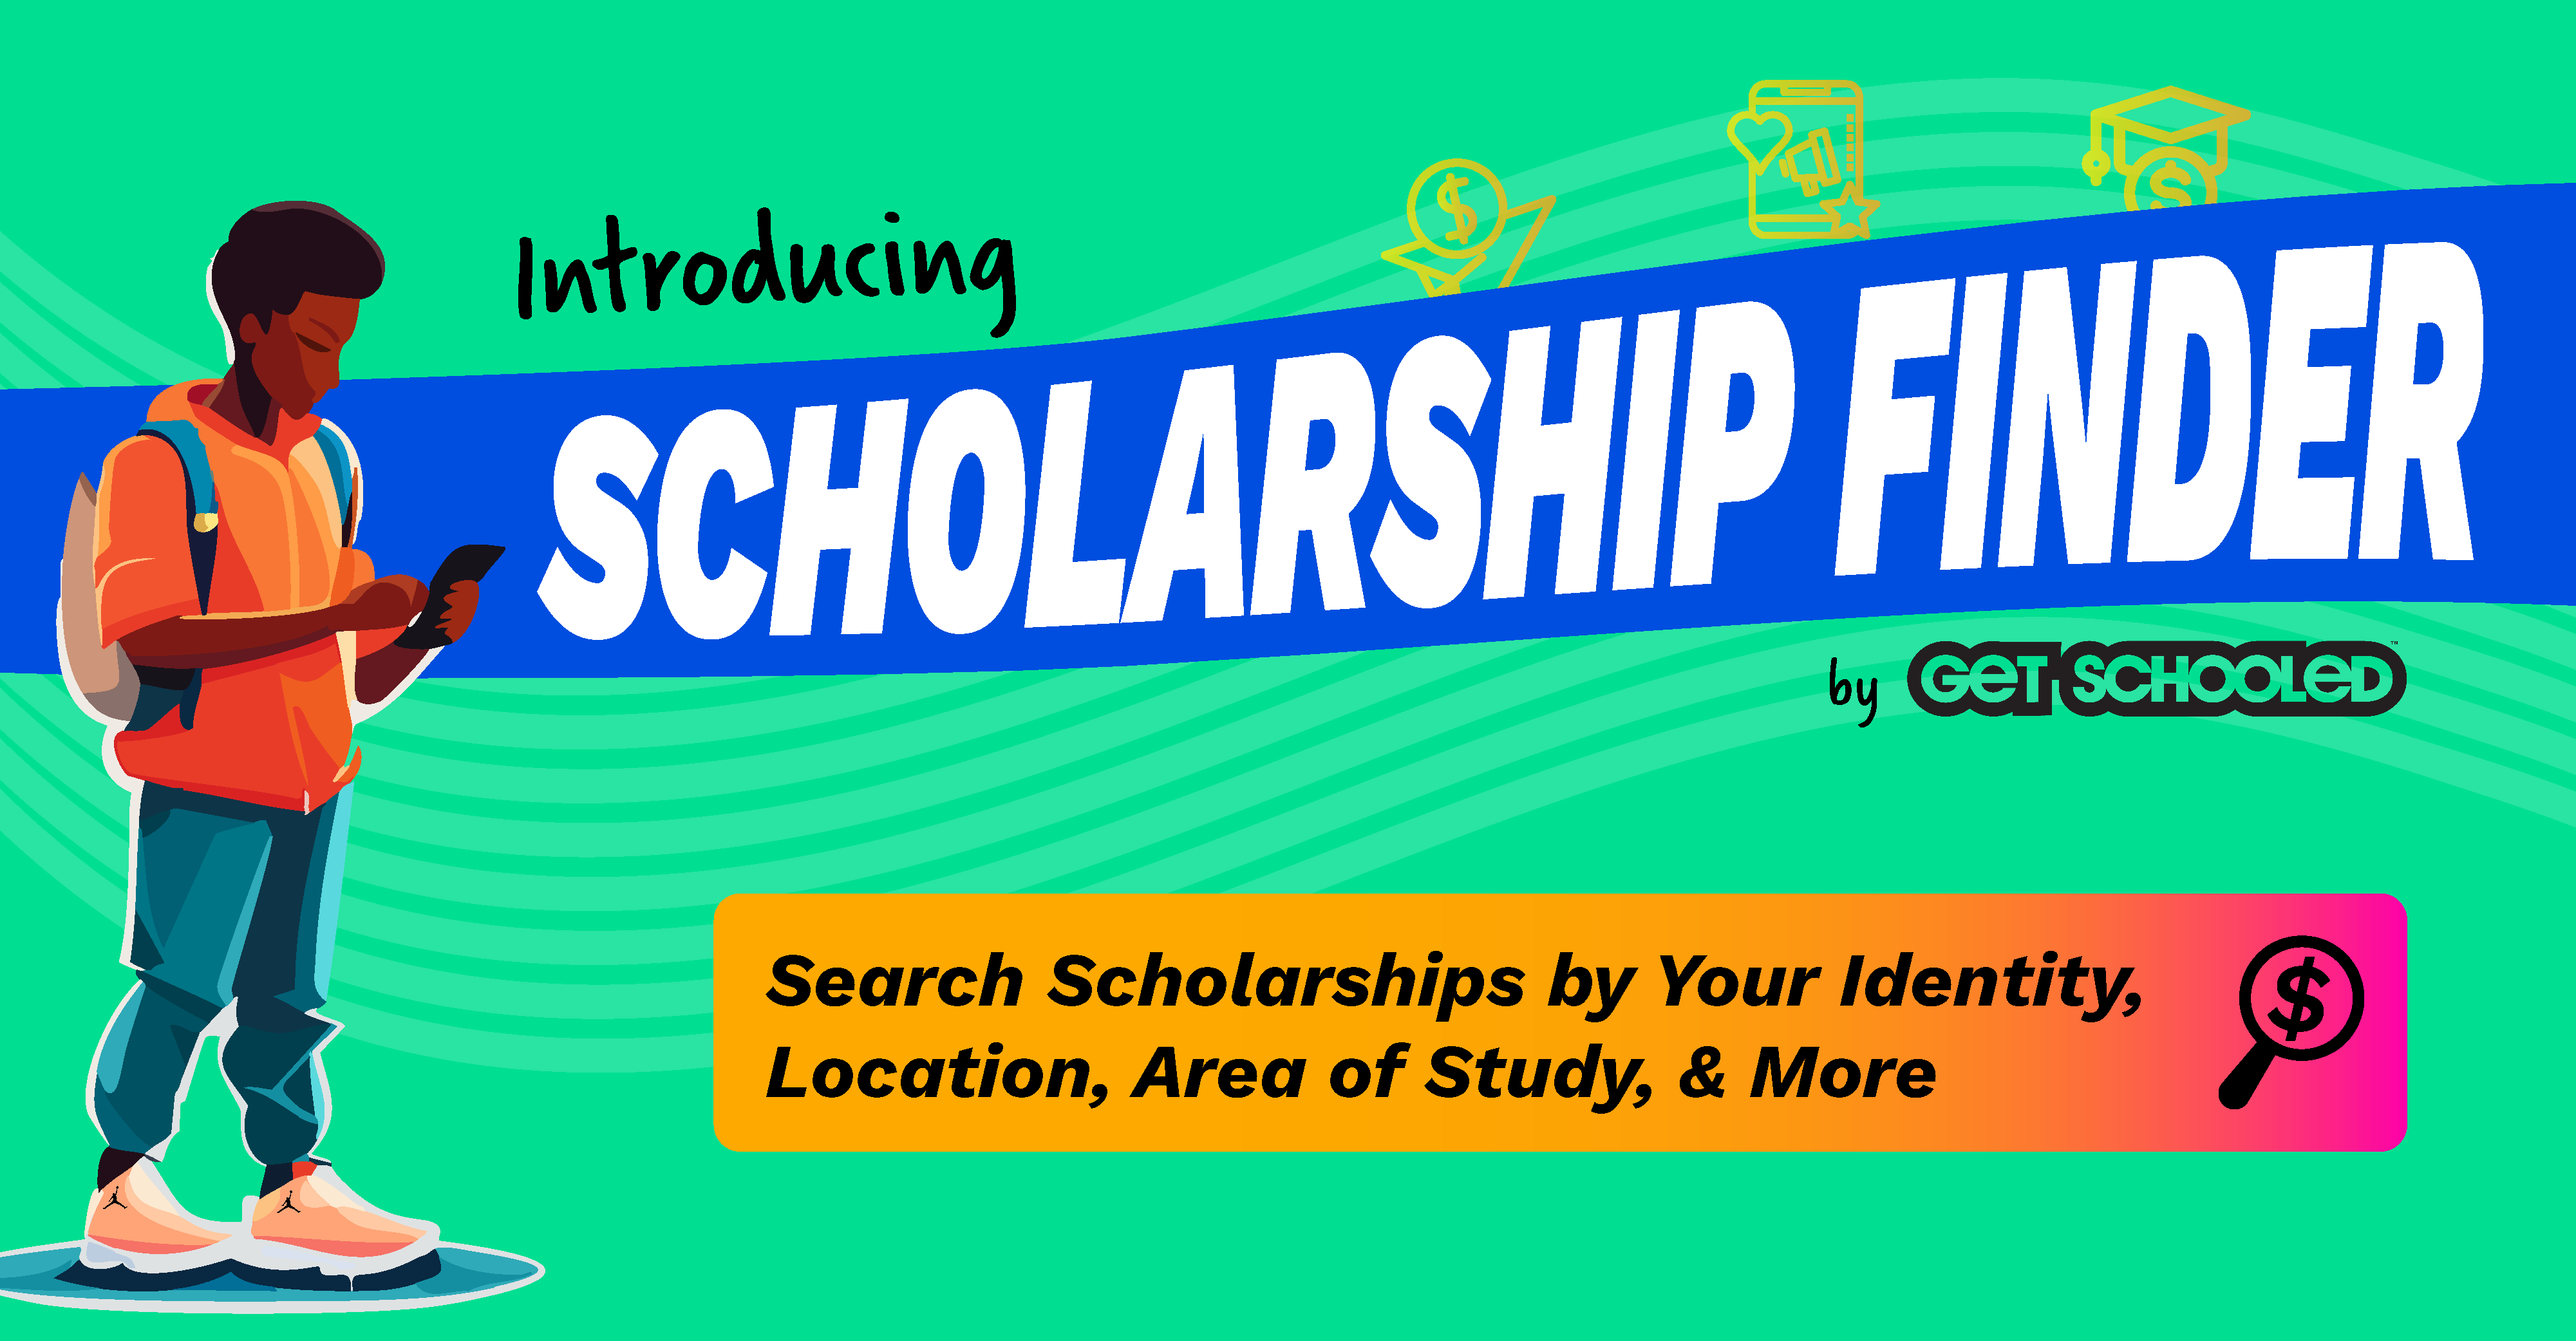 Illustration of a student (cartoon vector) with a backpack, gazing at their phone. The banner promotes the Get Schooled scholarship finder, stating, "Explore the Scholarship Finder by GET SCHOOLED: Discover Opportunities Based on Your Identity, Location, Area of Study, & More." - Largest Scholarships You Can Find for College